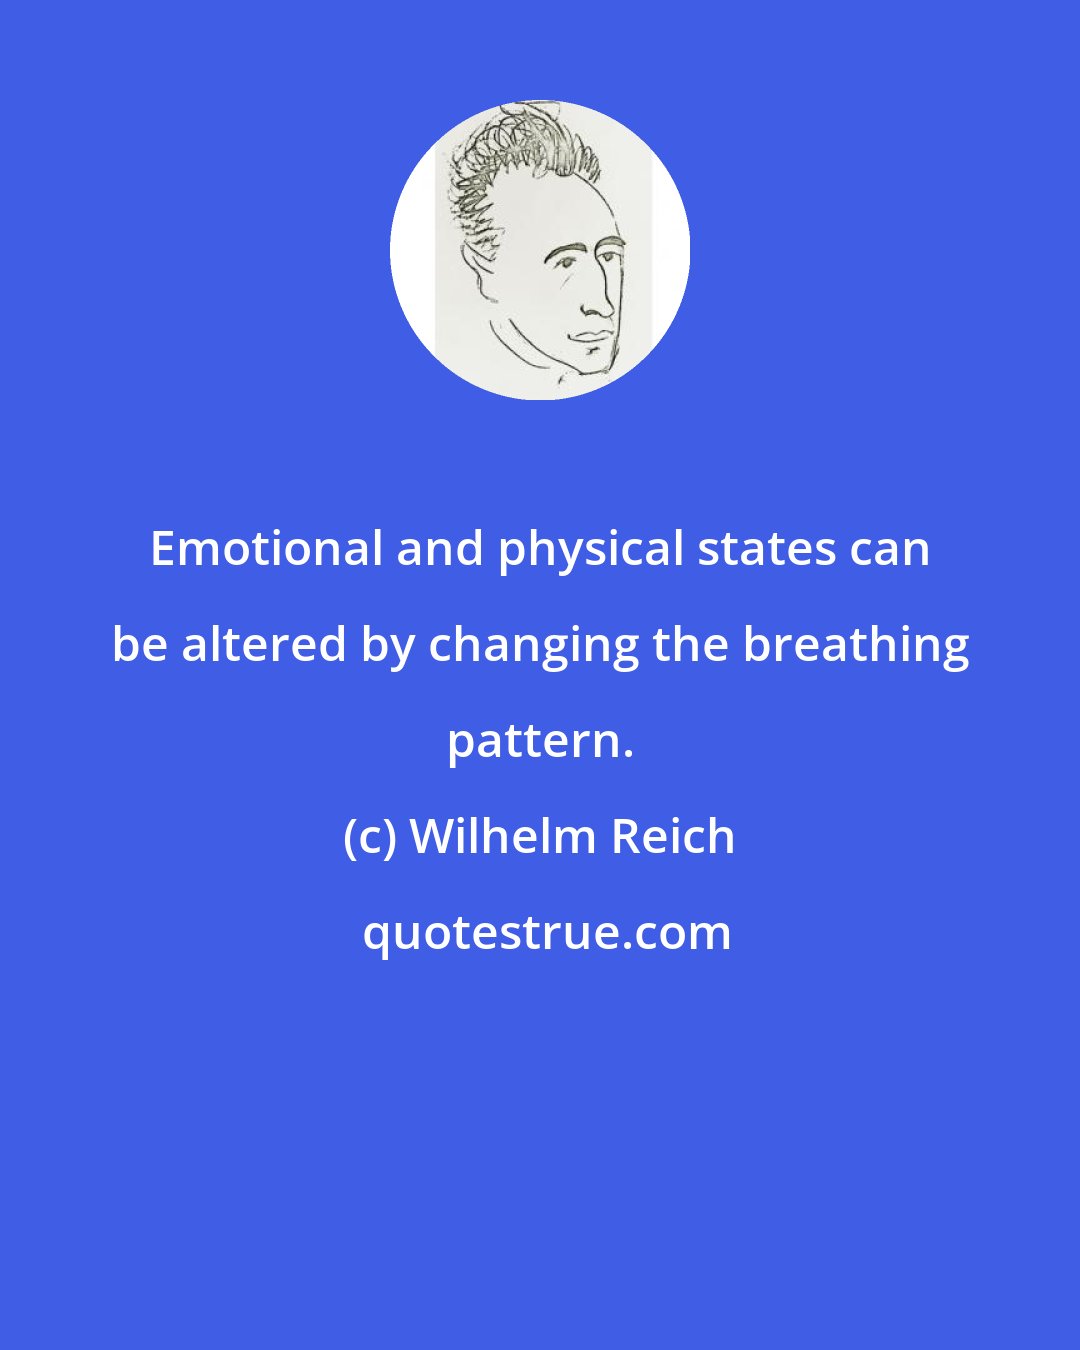 Wilhelm Reich: Emotional and physical states can be altered by changing the breathing pattern.